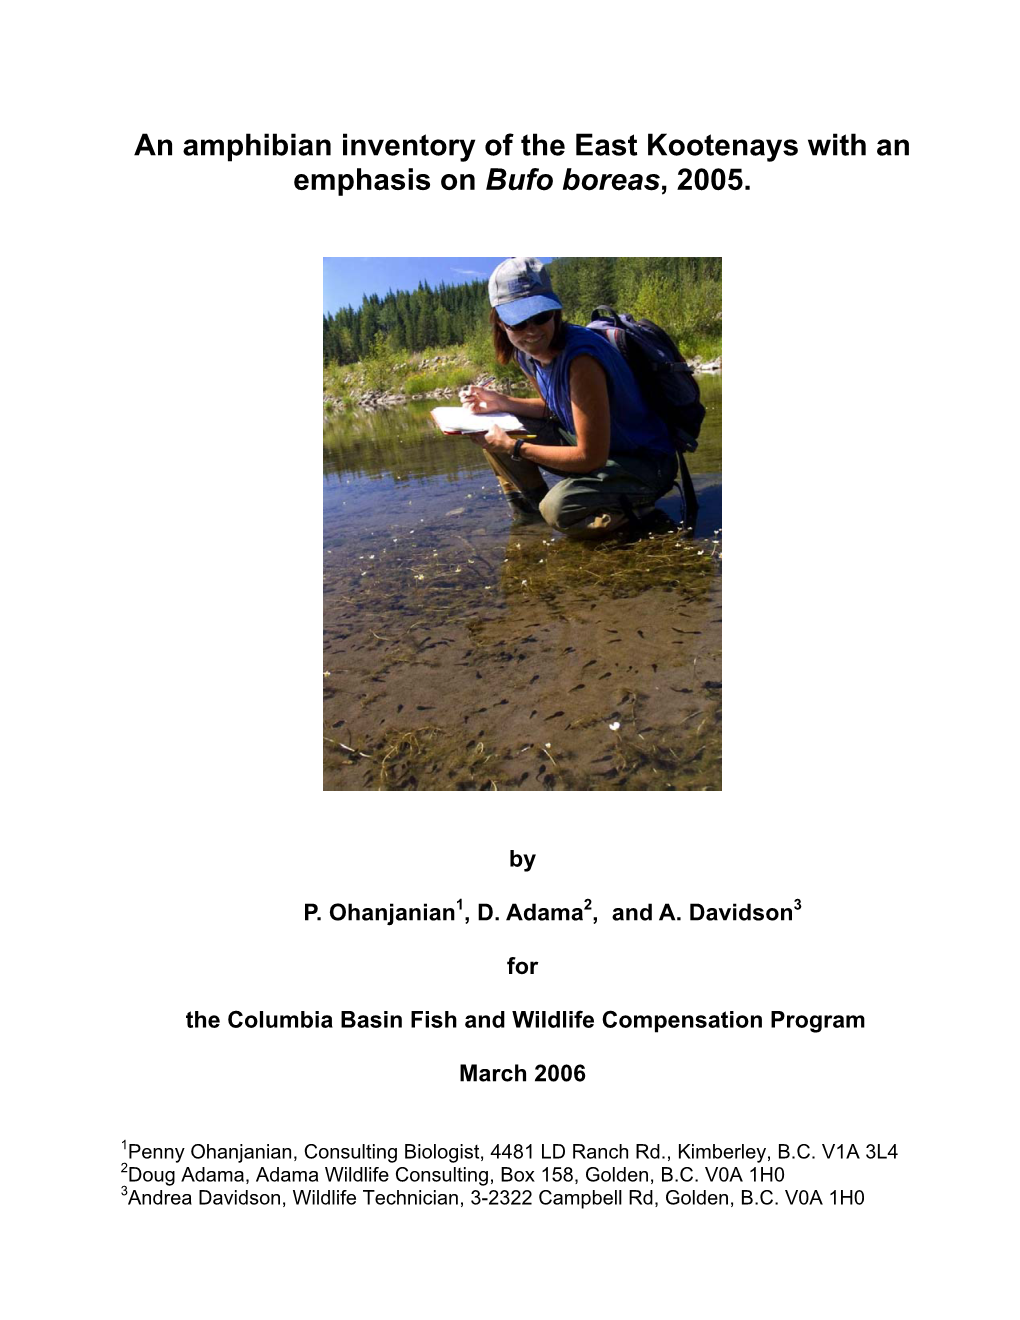 An Amphibian Inventory of the East Kootenays with an Emphasis on Bufo Boreas, 2005